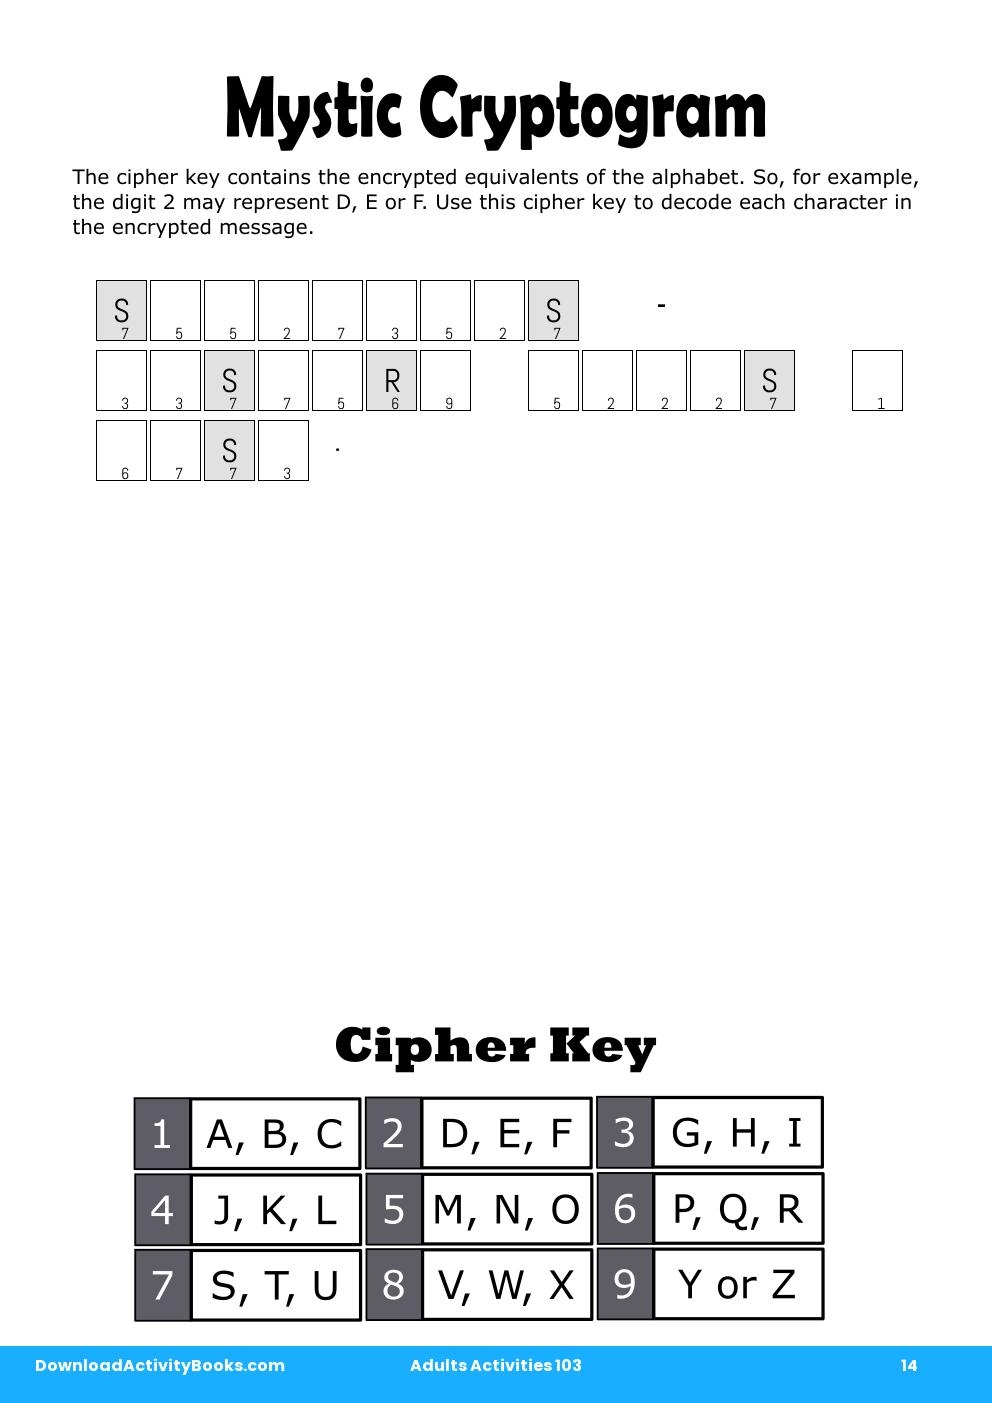 Mystic Cryptogram in Adults Activities 103